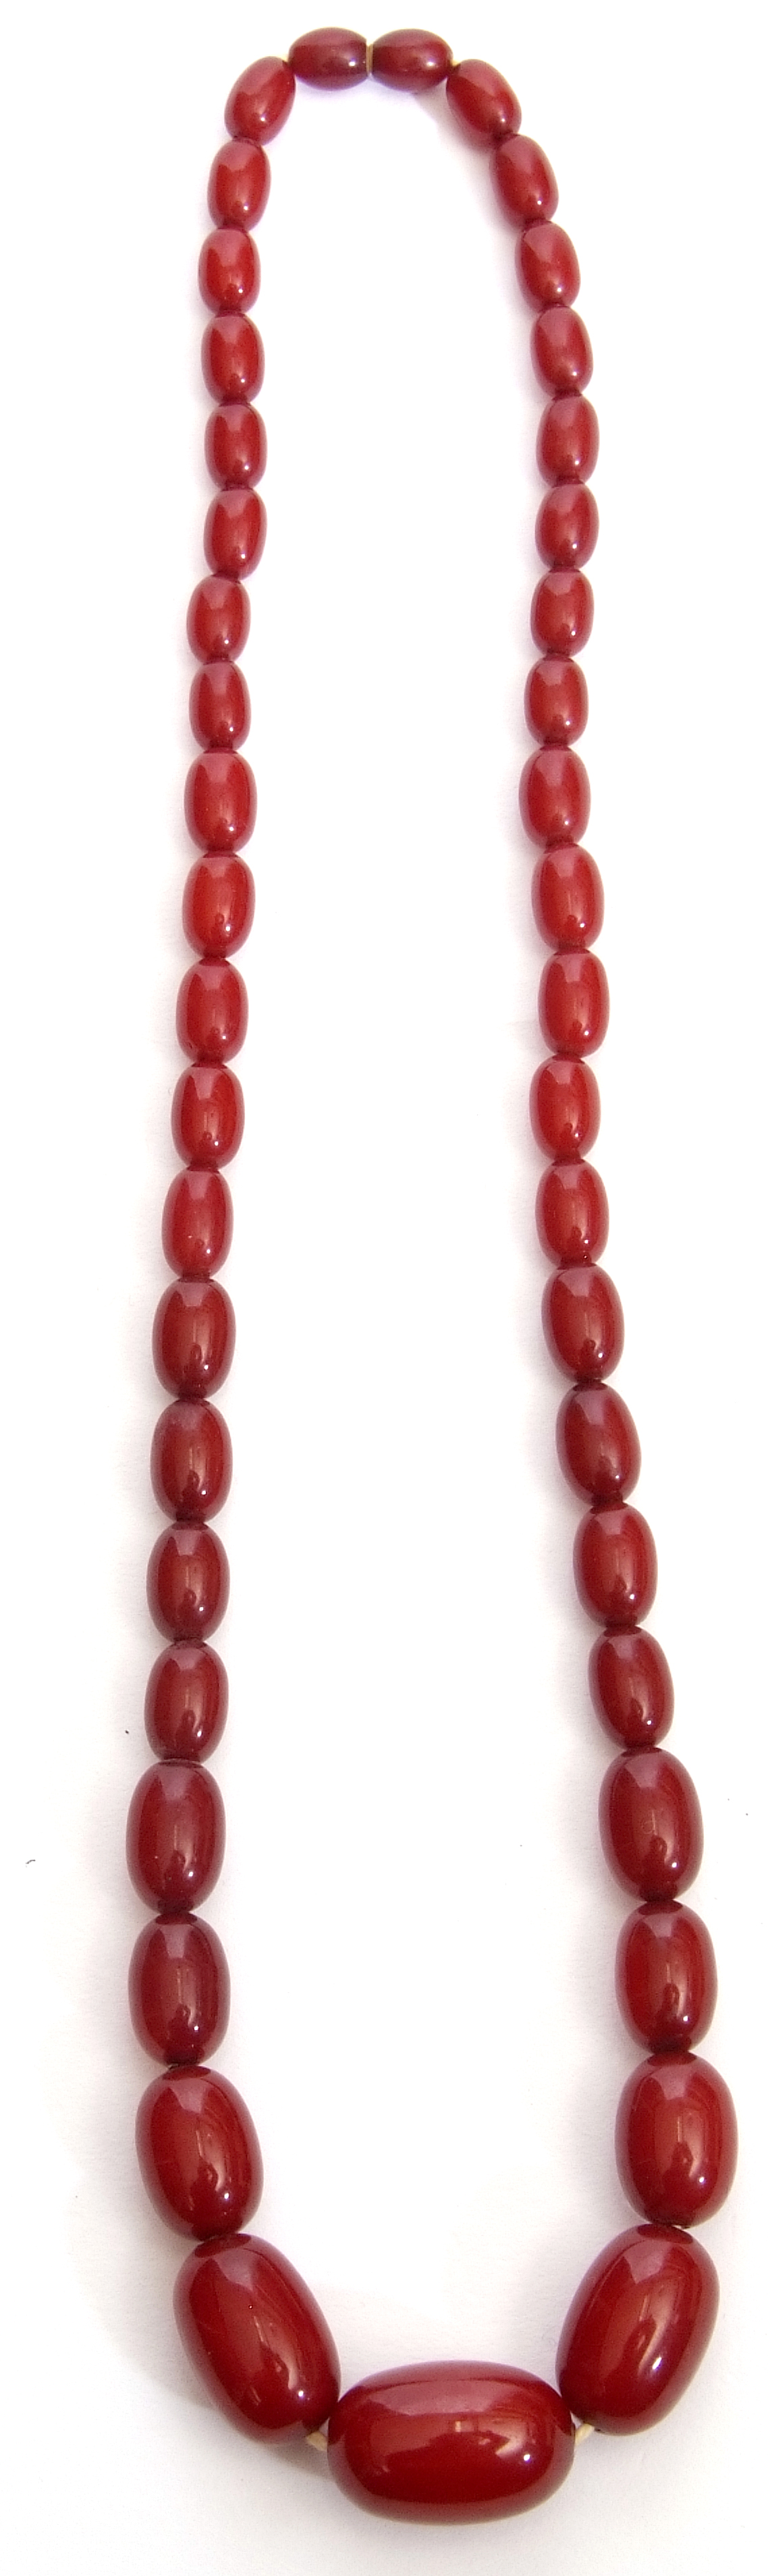 Vintage cherry amber bead necklace, a single row of oblong graduated beads, 1cm to 2.5cm, 30cm